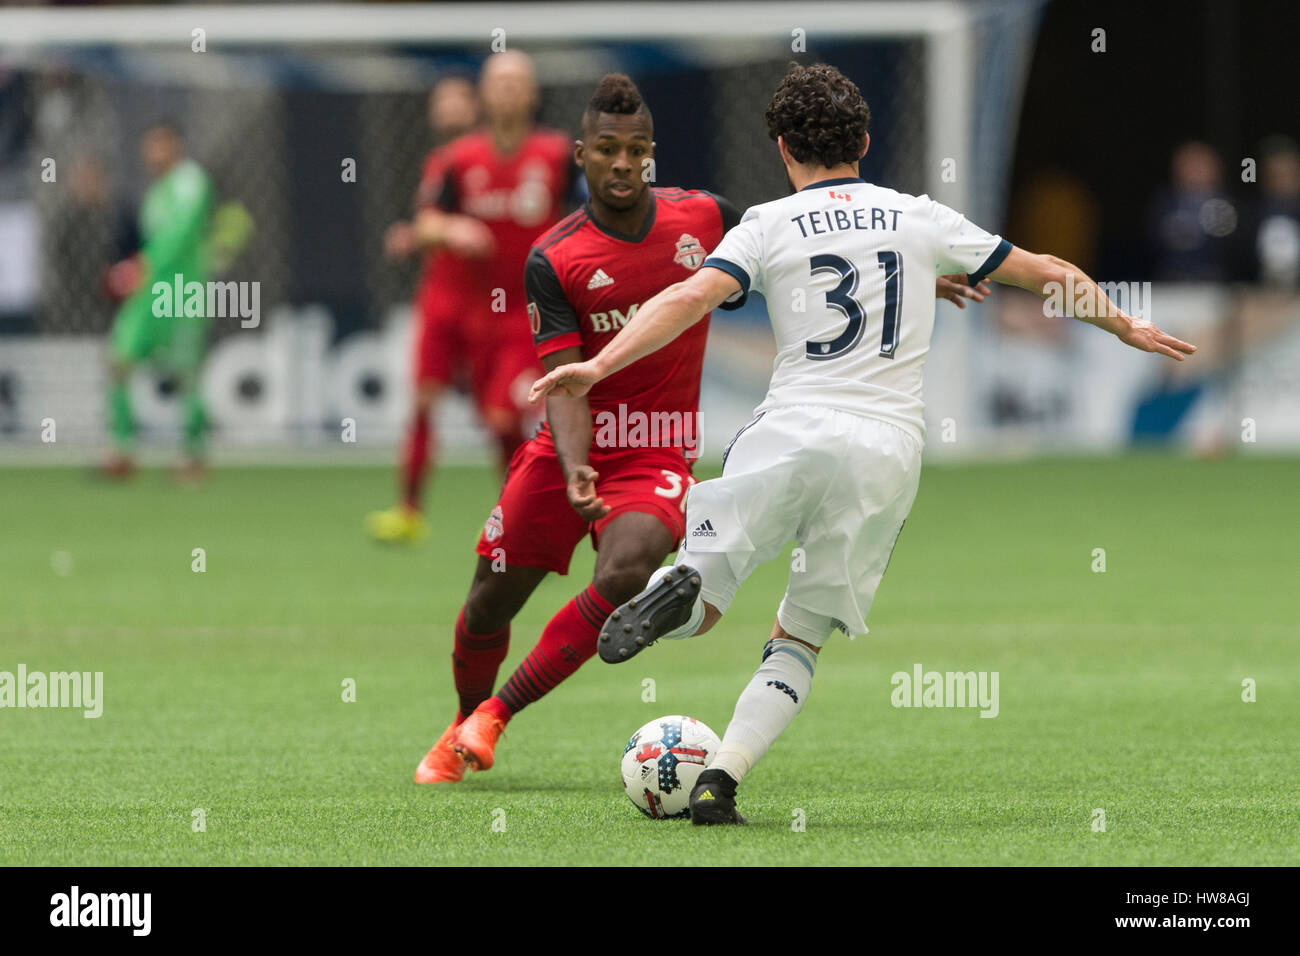 Vancouver, Canada. 18 March, 2017. Russell Teibert #31 of the Vancouver Whitecaps with Armando Cooper #31 of Toronto FC about to challenge him. Vancouver Whitecaps vs Toronto FC, BC Place Stadium. Toronto defeats Vancouver 2-0, with goals from Victor Vasquez #7 and Jozy Altidore #17 of Toronto FC  © Gerry Rousseau/Alamy Live News Stock Photo